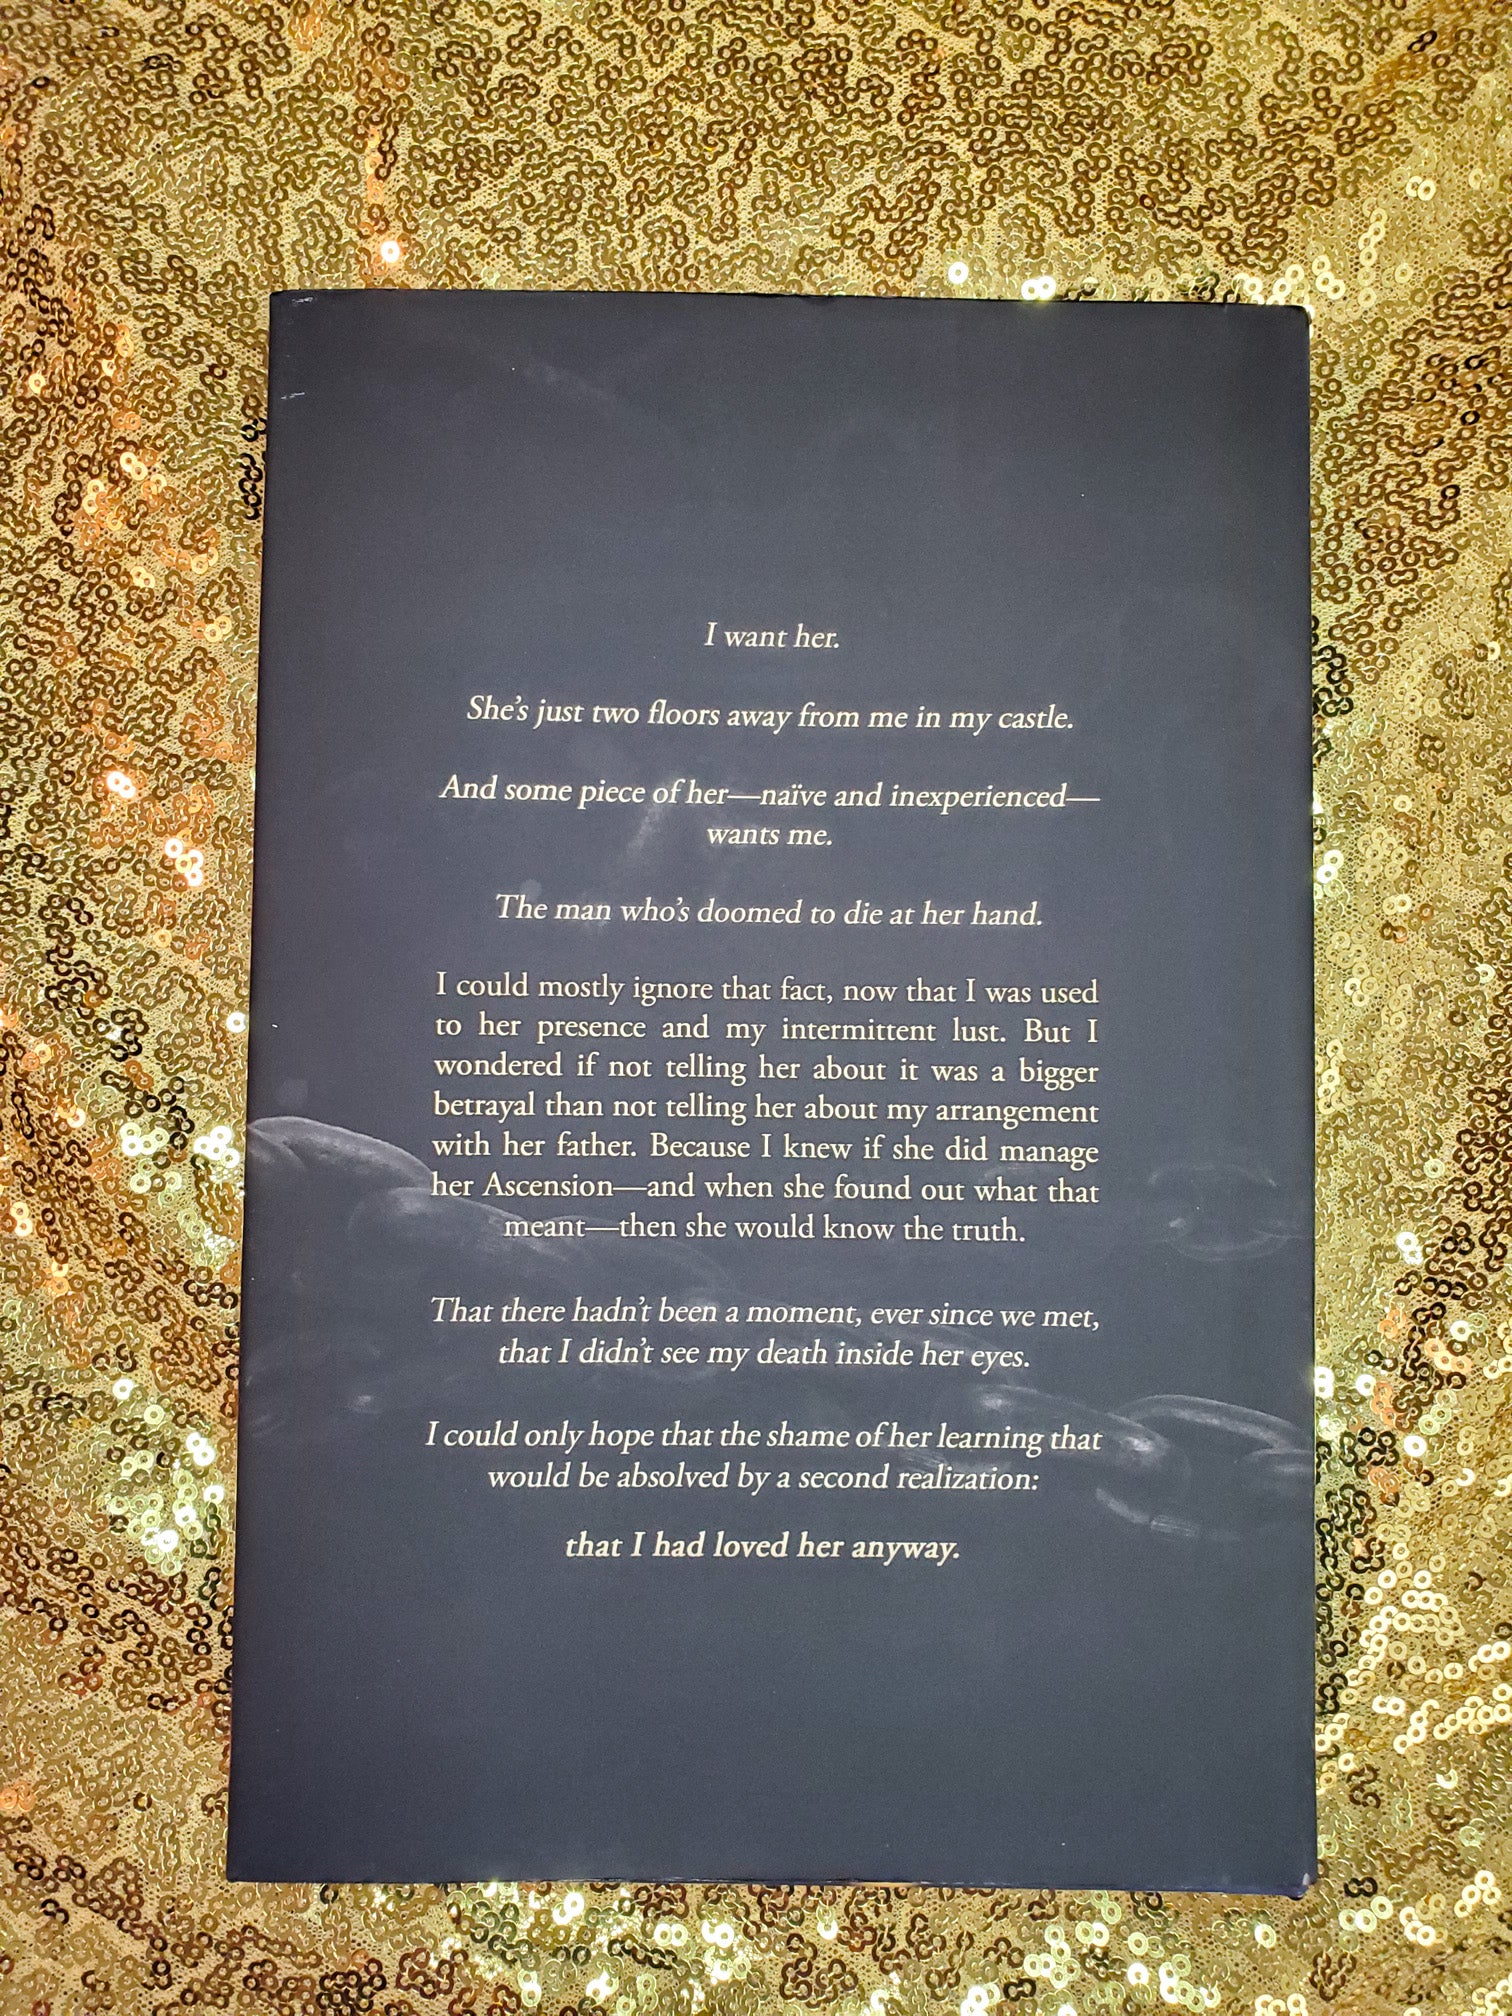 Hardcover of Break Her by Cassie Alexander on a gold sequined background. Image shows the back cover.